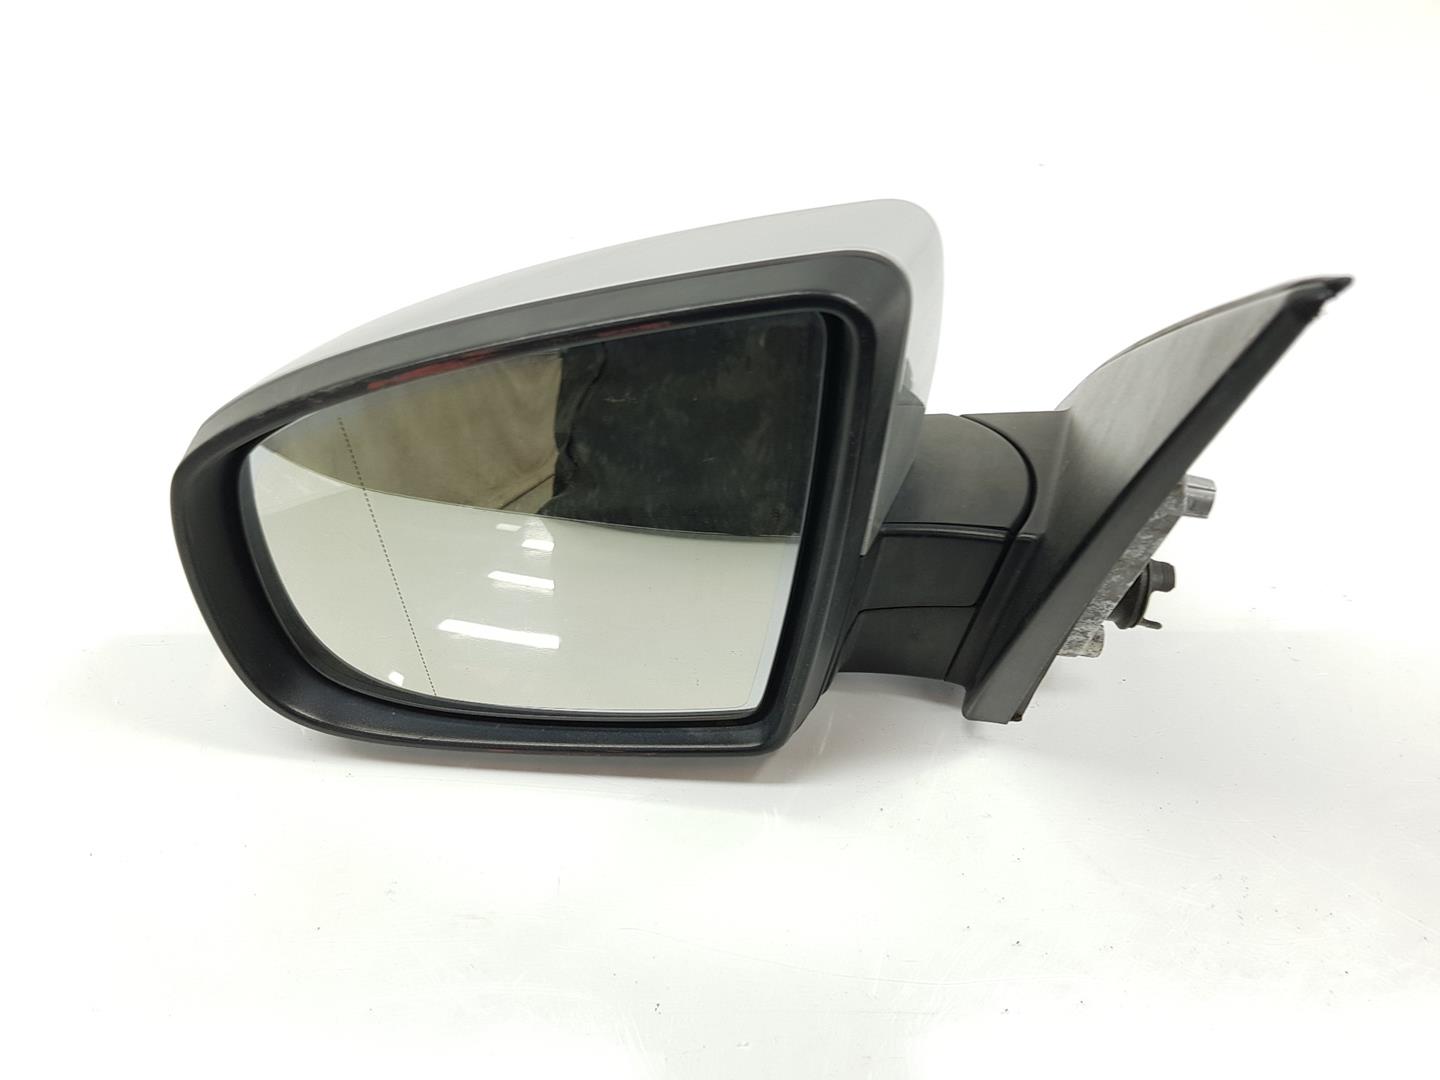 BMW X5 E70 (2006-2013) Left Side Wing Mirror 51167282721, 51167282721 24243967